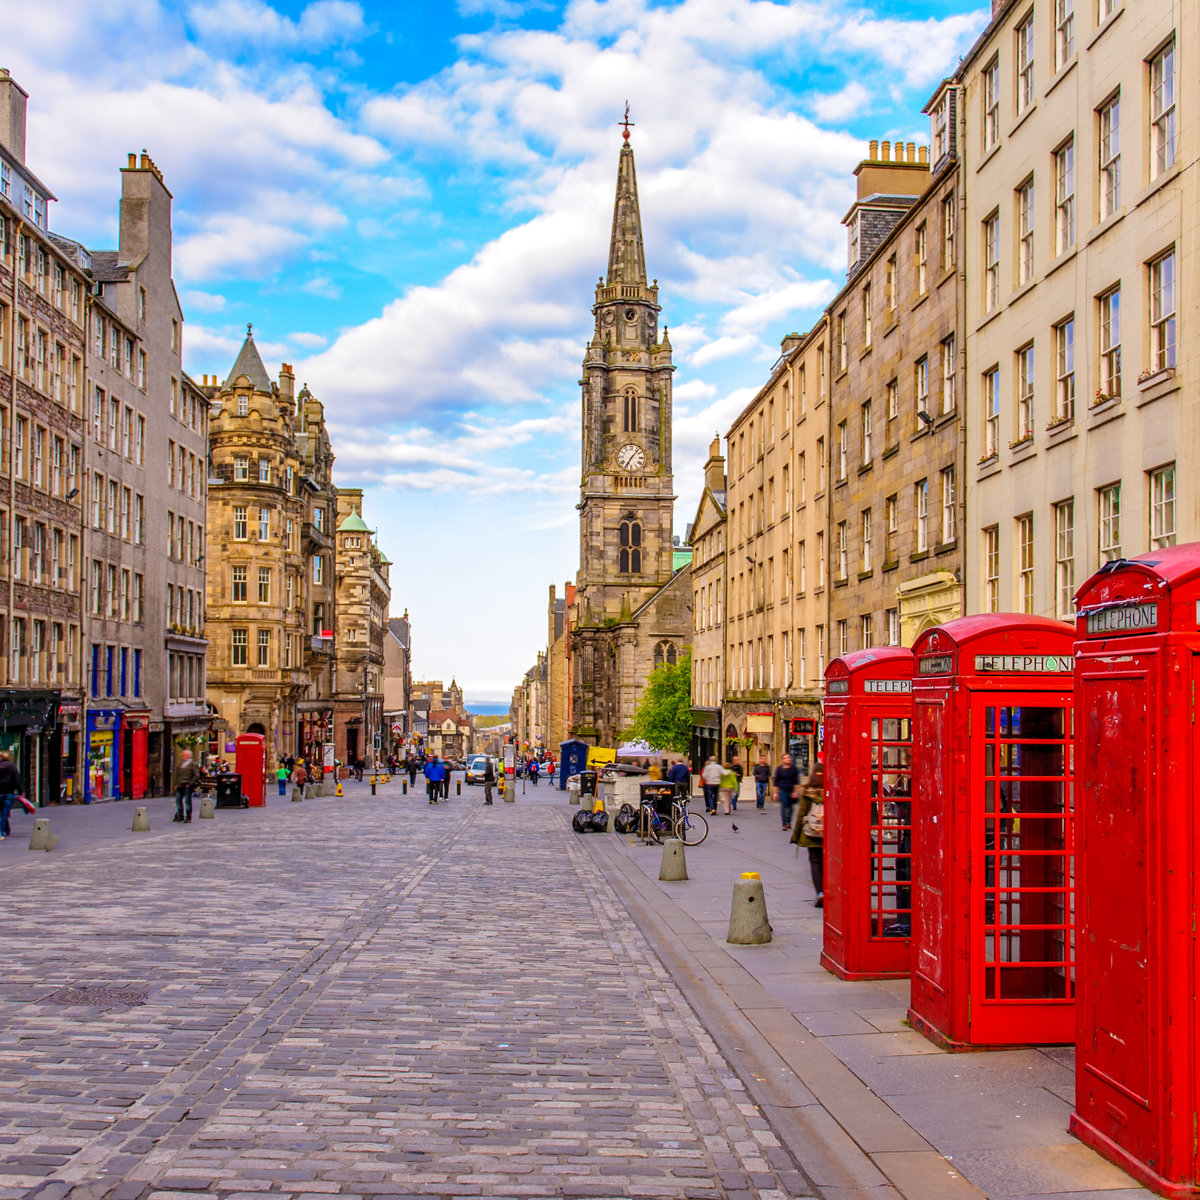 IMAGE: View of the Royal Mile in Edinburgh